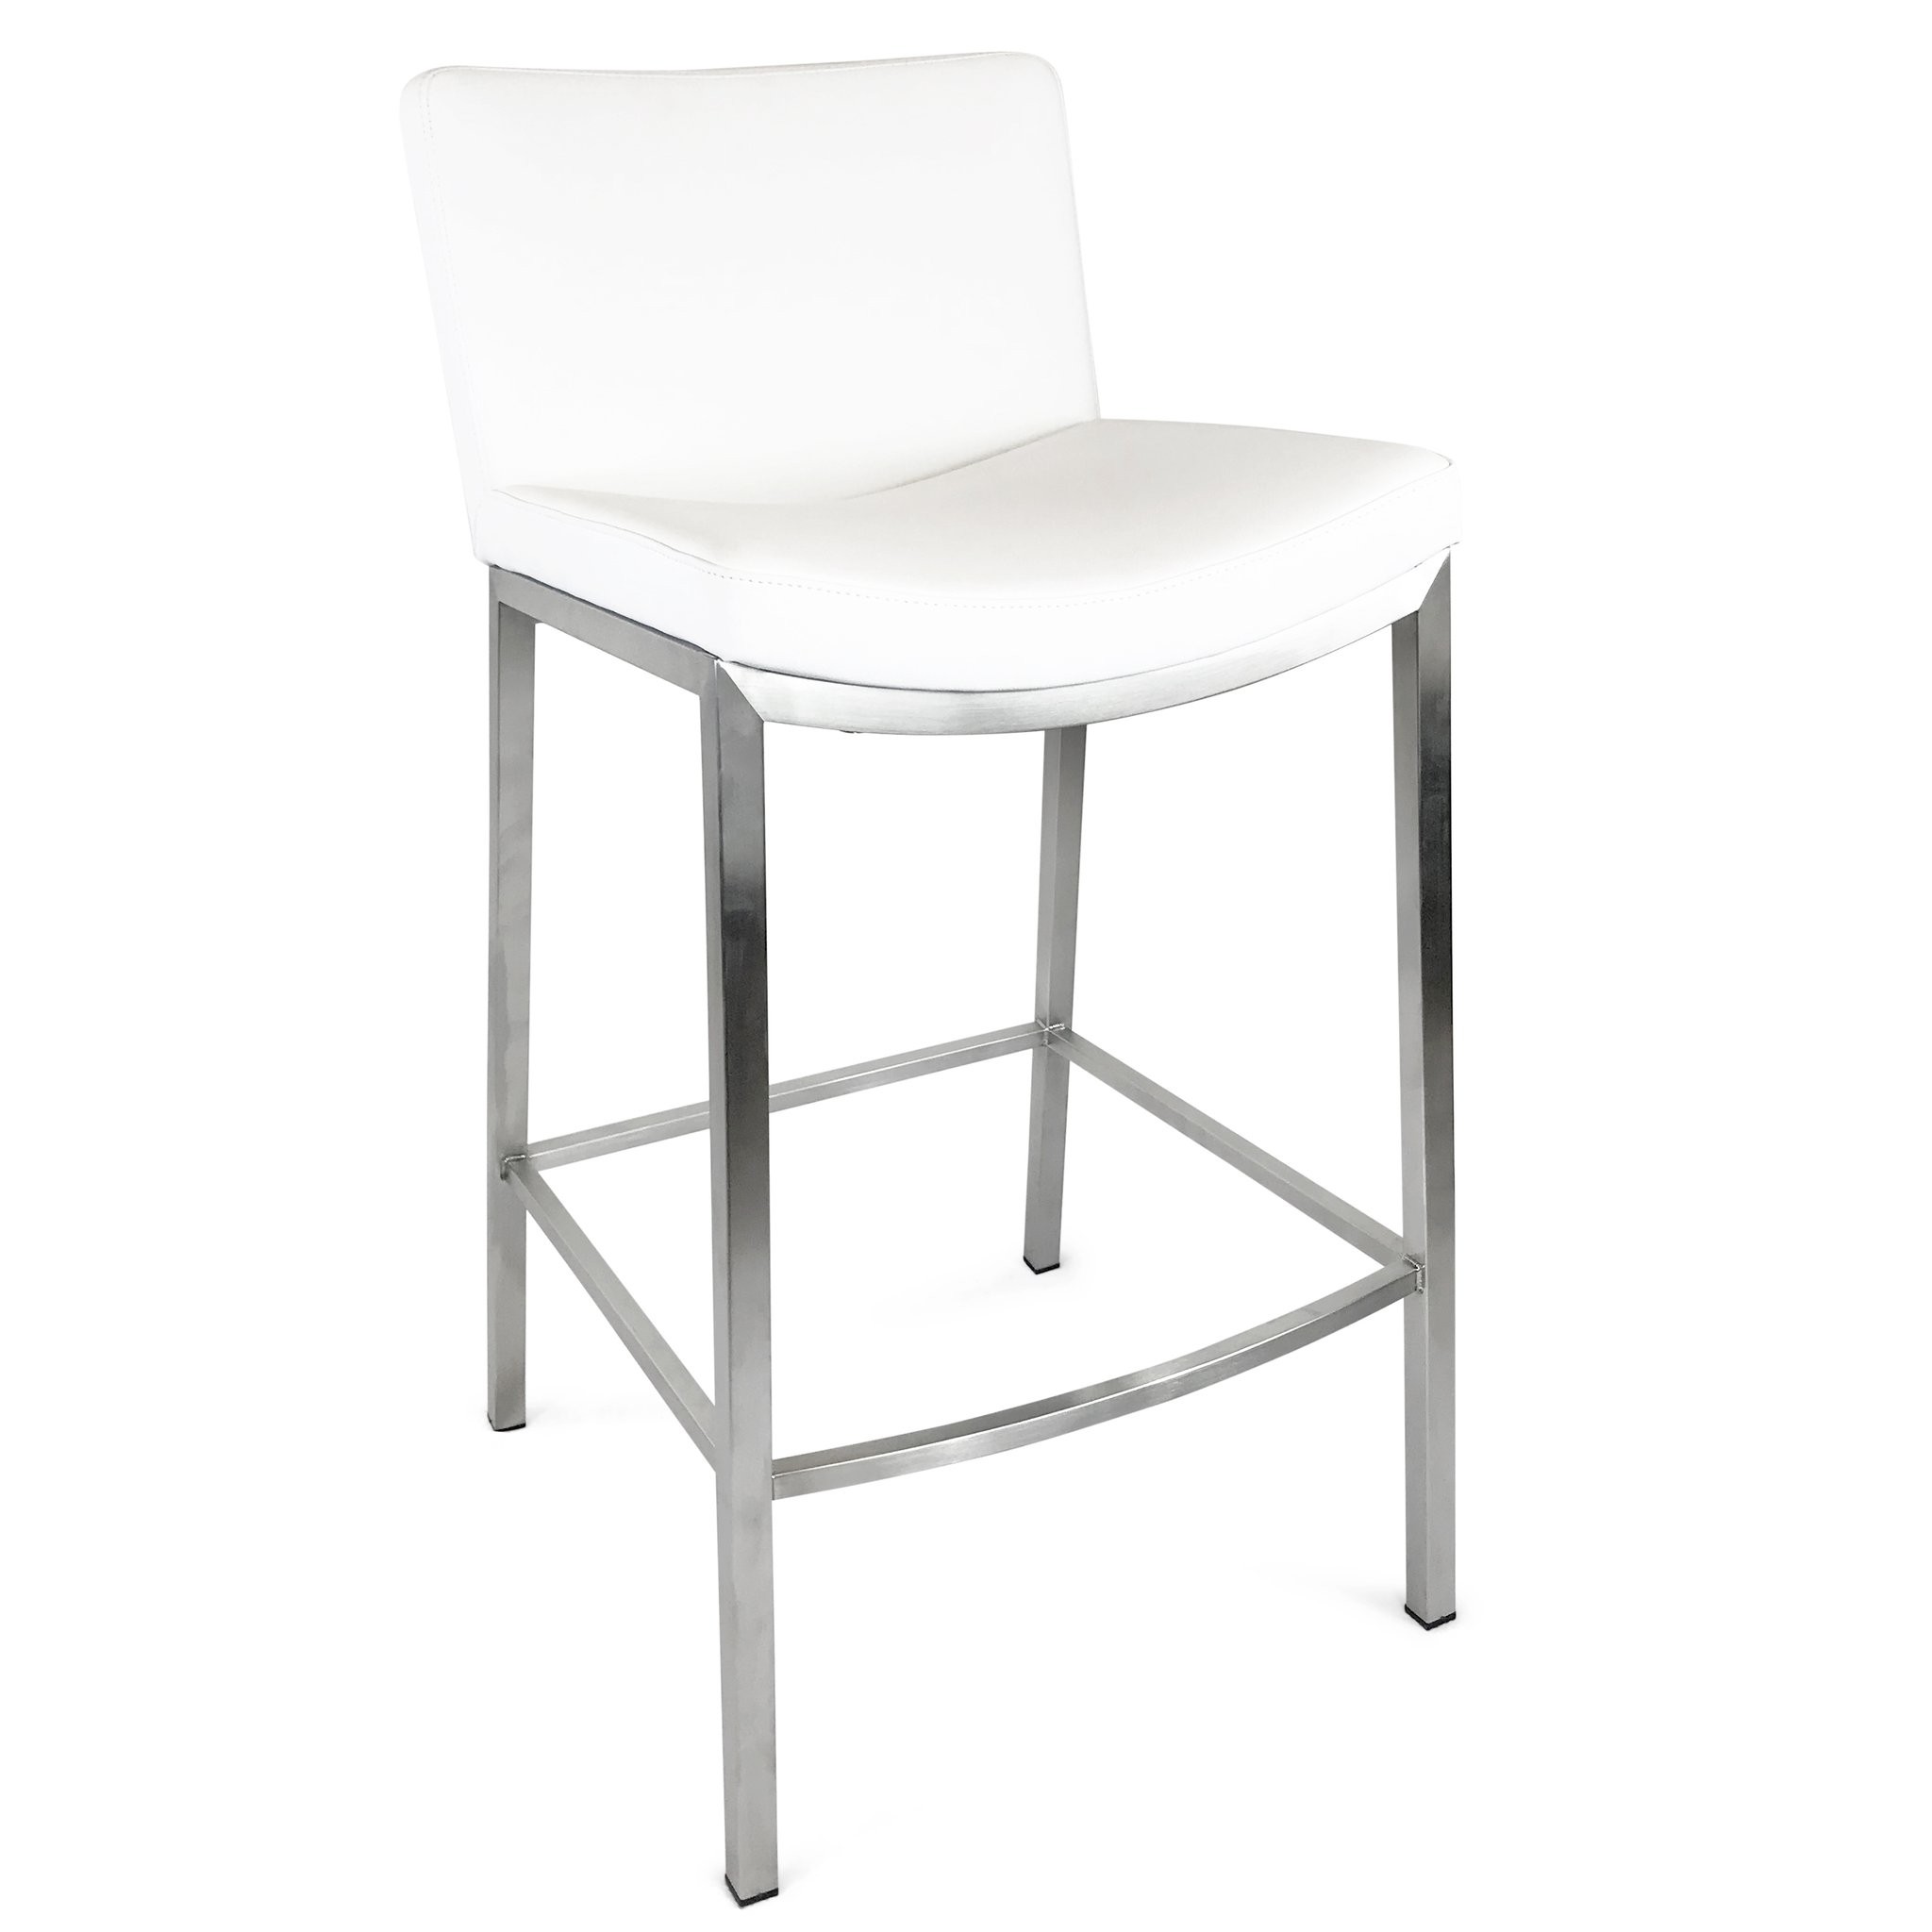 Myles stainless steel bar stool in white marc main